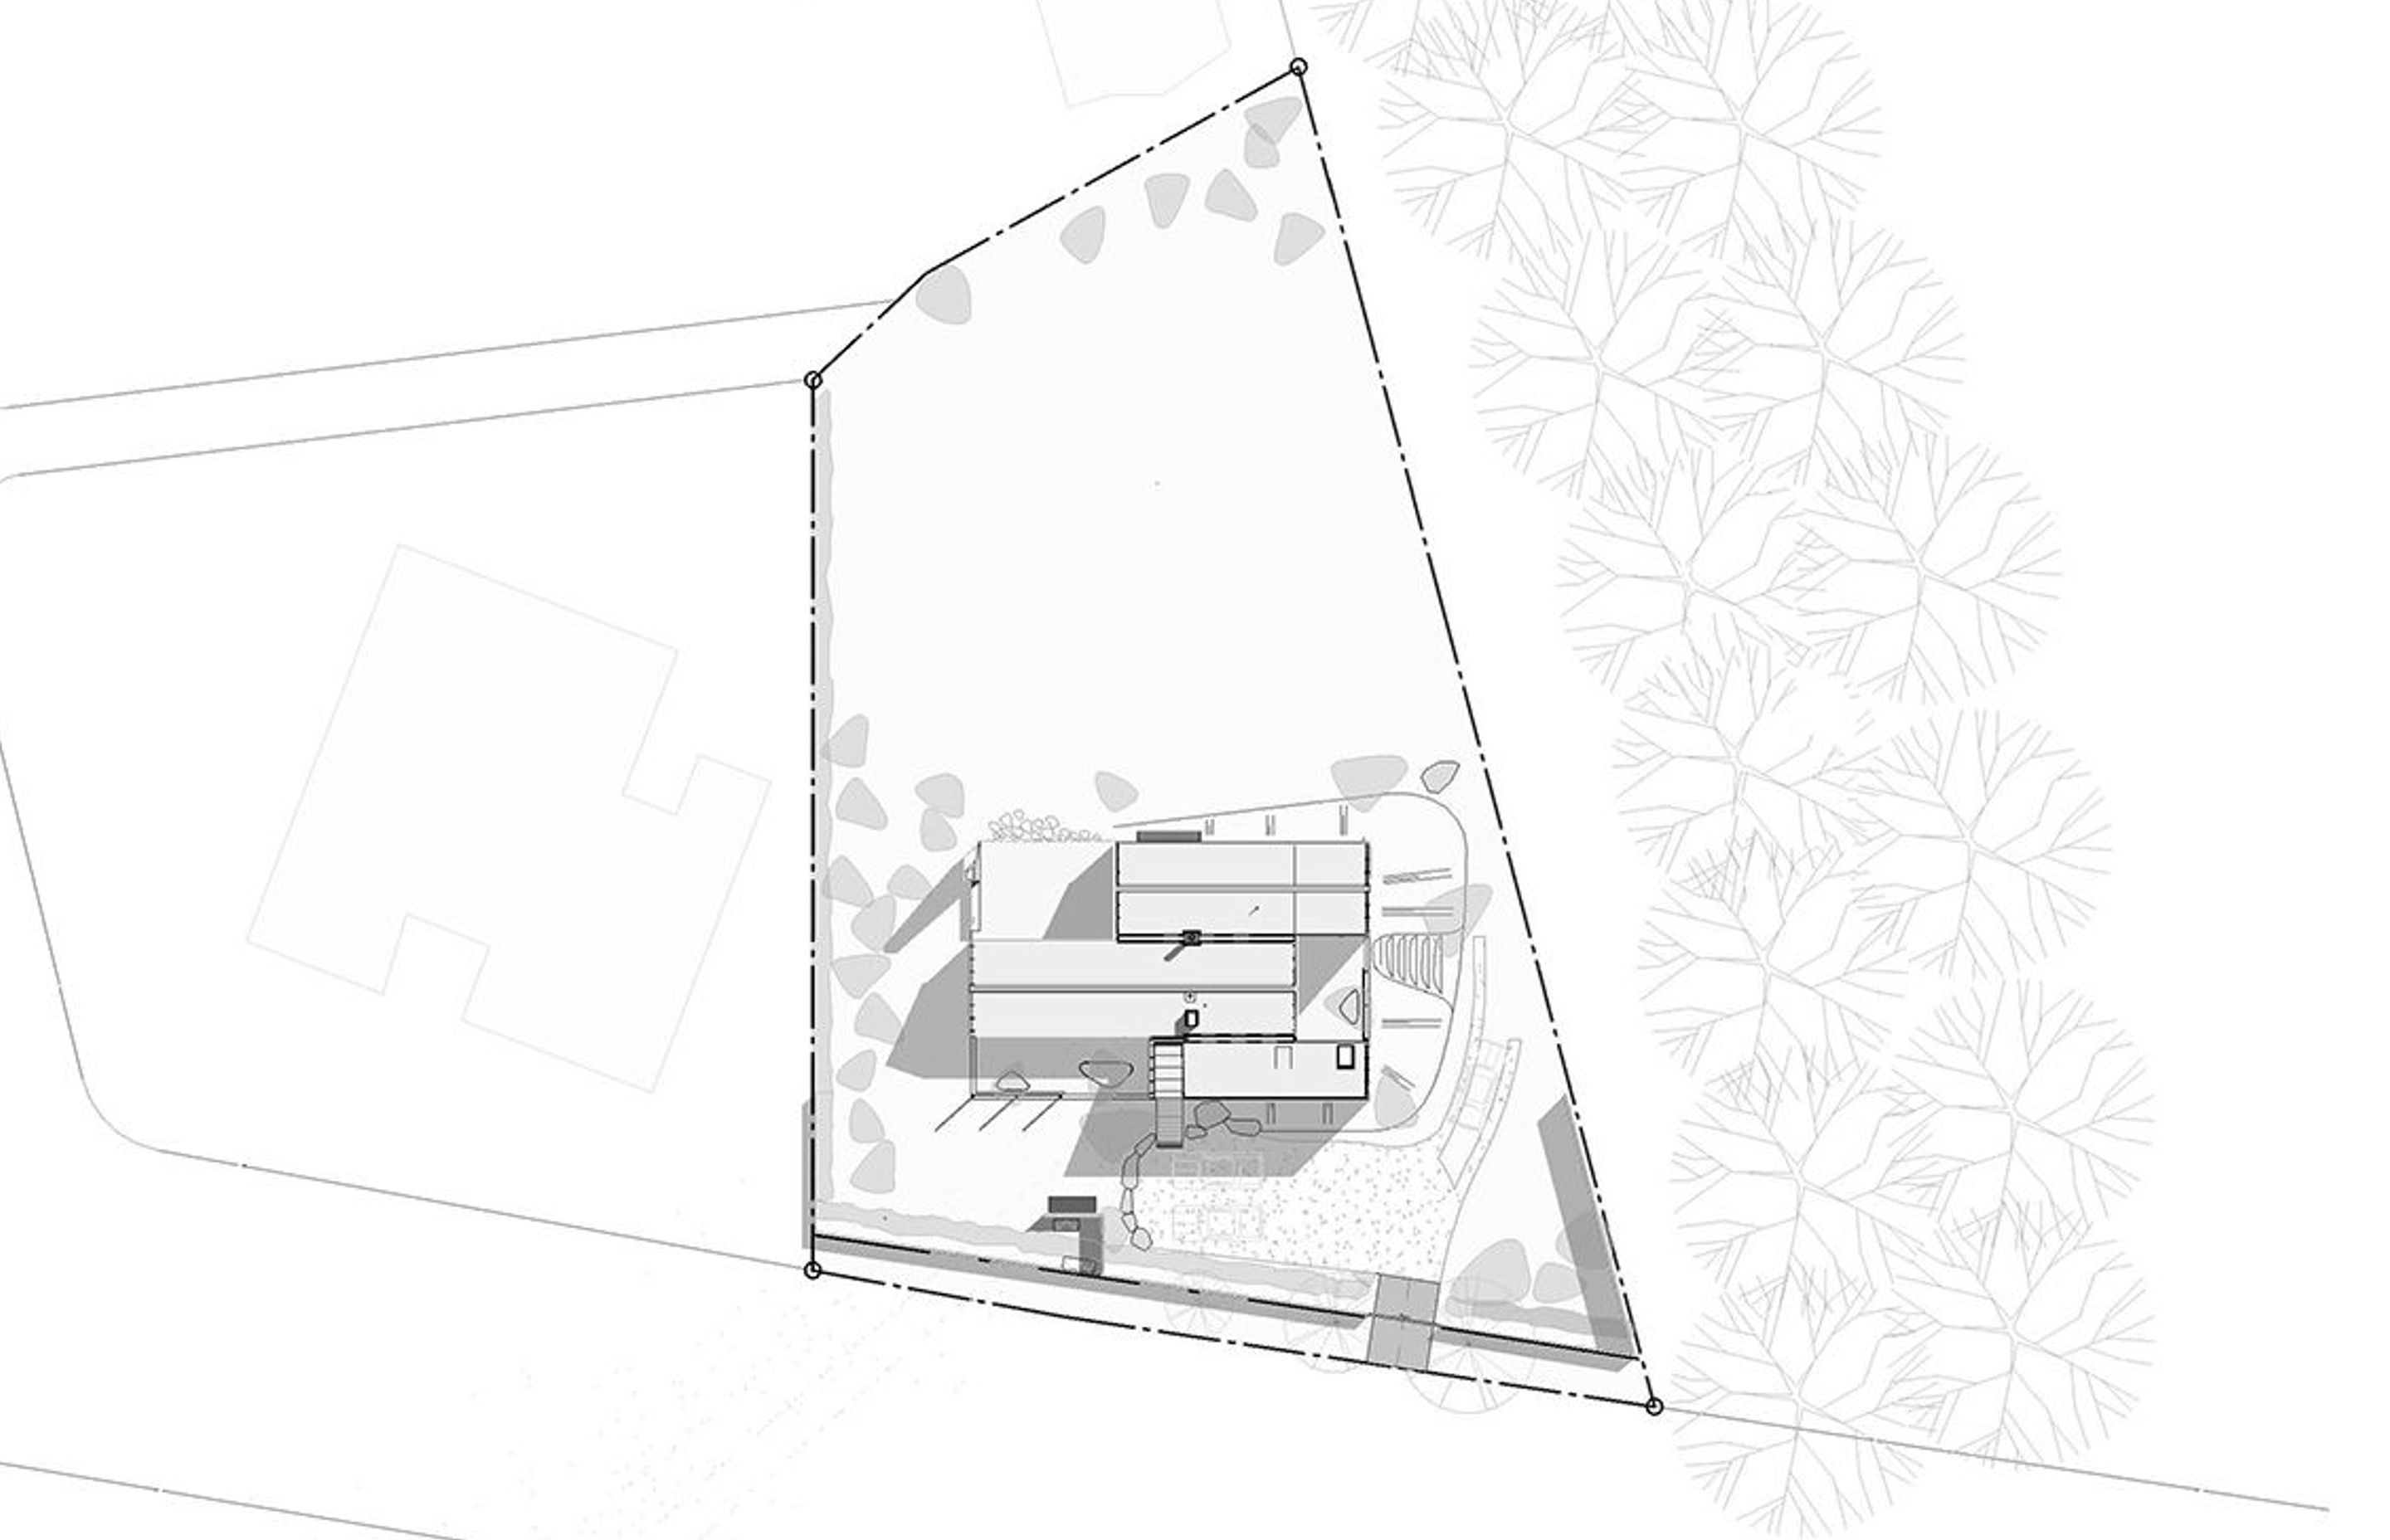 The site plan of Wanaka Crib shows the forms slipping past one another. Drawing by PAC Studio and Steven Lloyd Architecture.